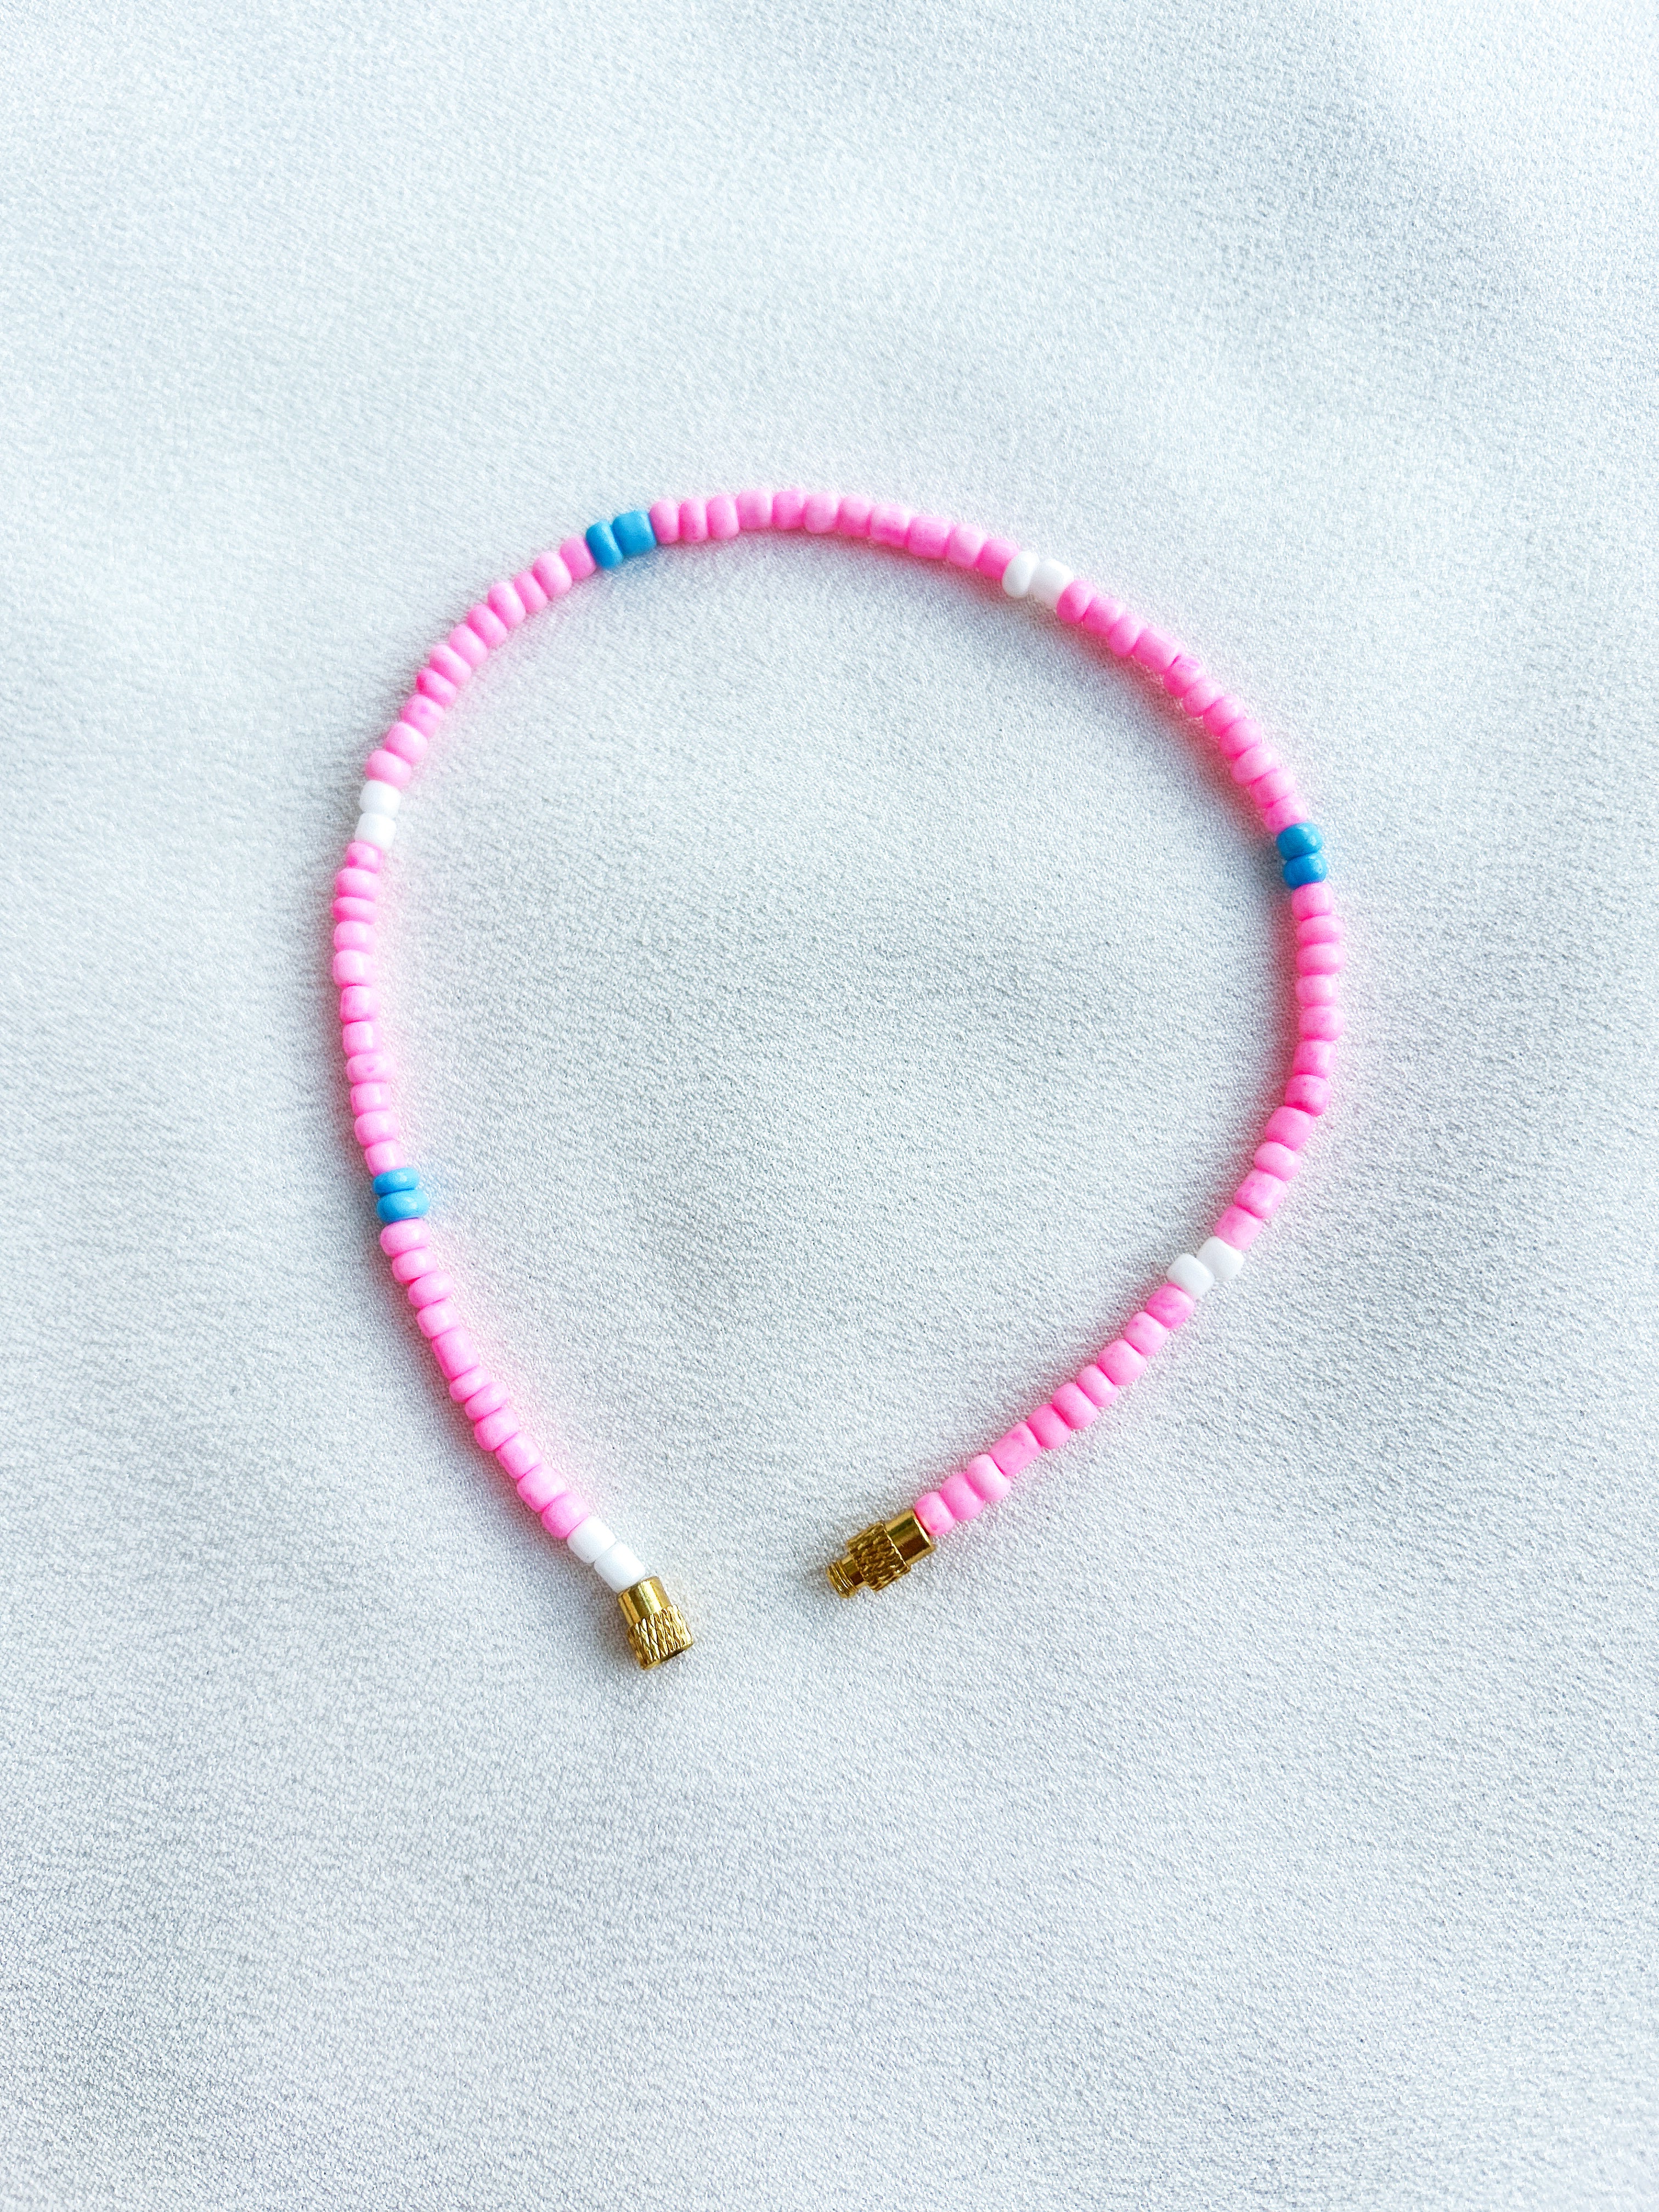 [THE ELEVEN] Anklet/Bracelet: Pink/White + Blue [Small Beads]